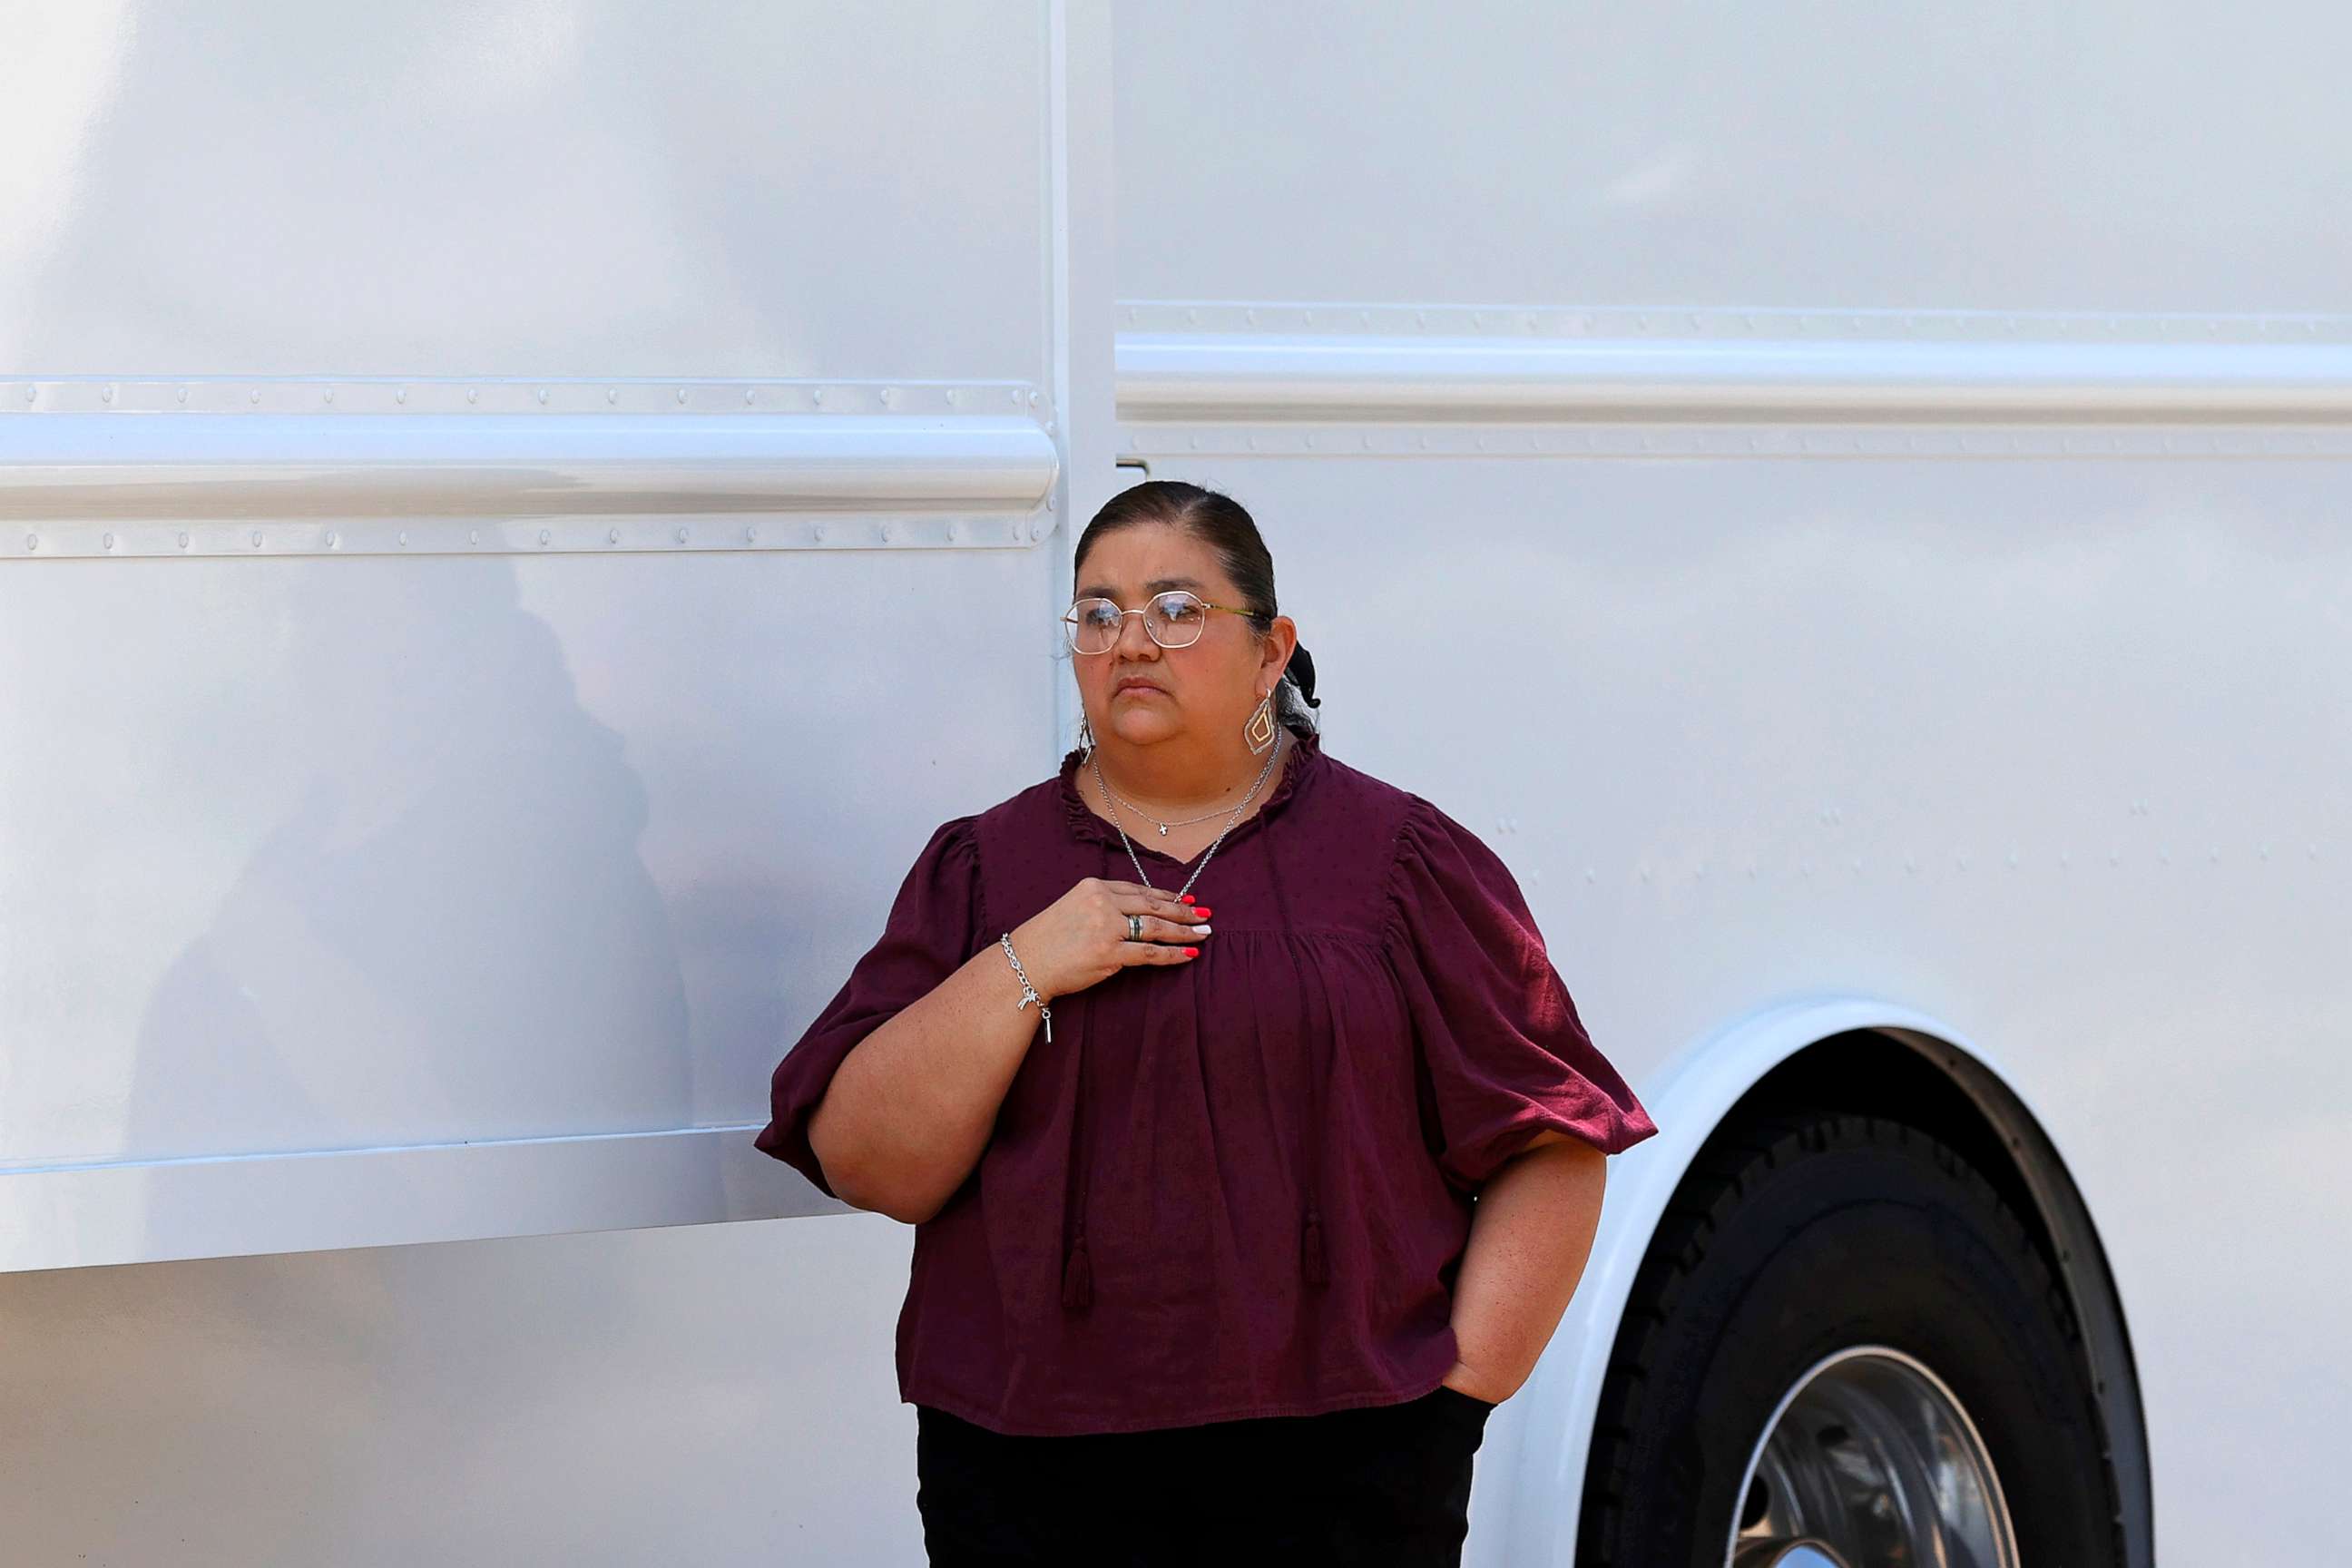 PHOTO: Robb Elementary School principal Mandy Gutierrez waits for President Joe Biden to arrive to honor the victims killed in this week's school shooting, May 29, 2022, in Uvalde, Texas.